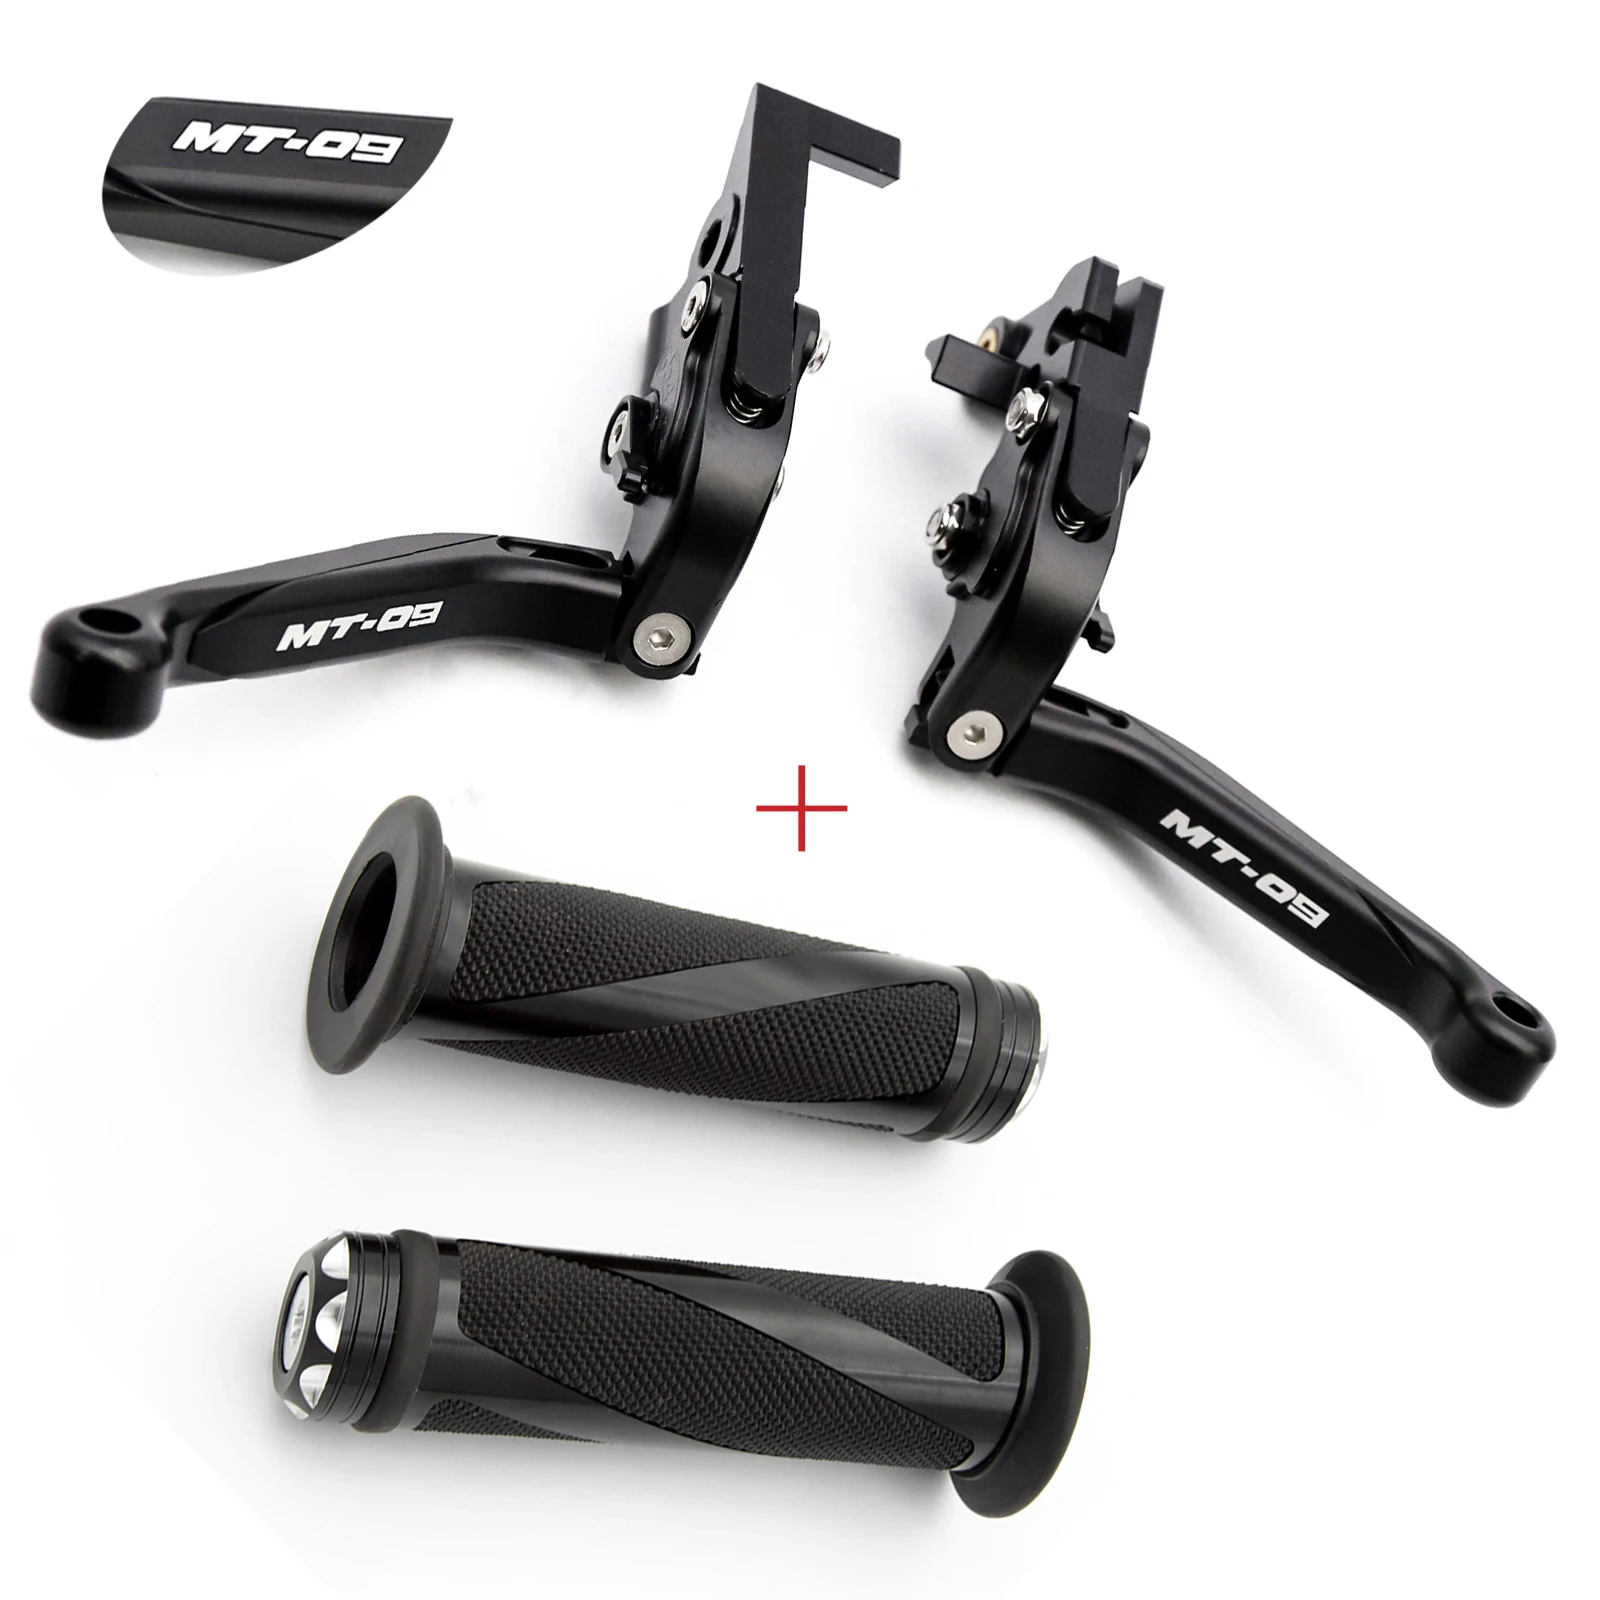 

Motorcycle Folding Extendable Brake Clutch Lever Hand Grip For Yamaha FJ-09 MT-09 MT09 MT 09 Tracer 2015-2020 2019 2018 2017